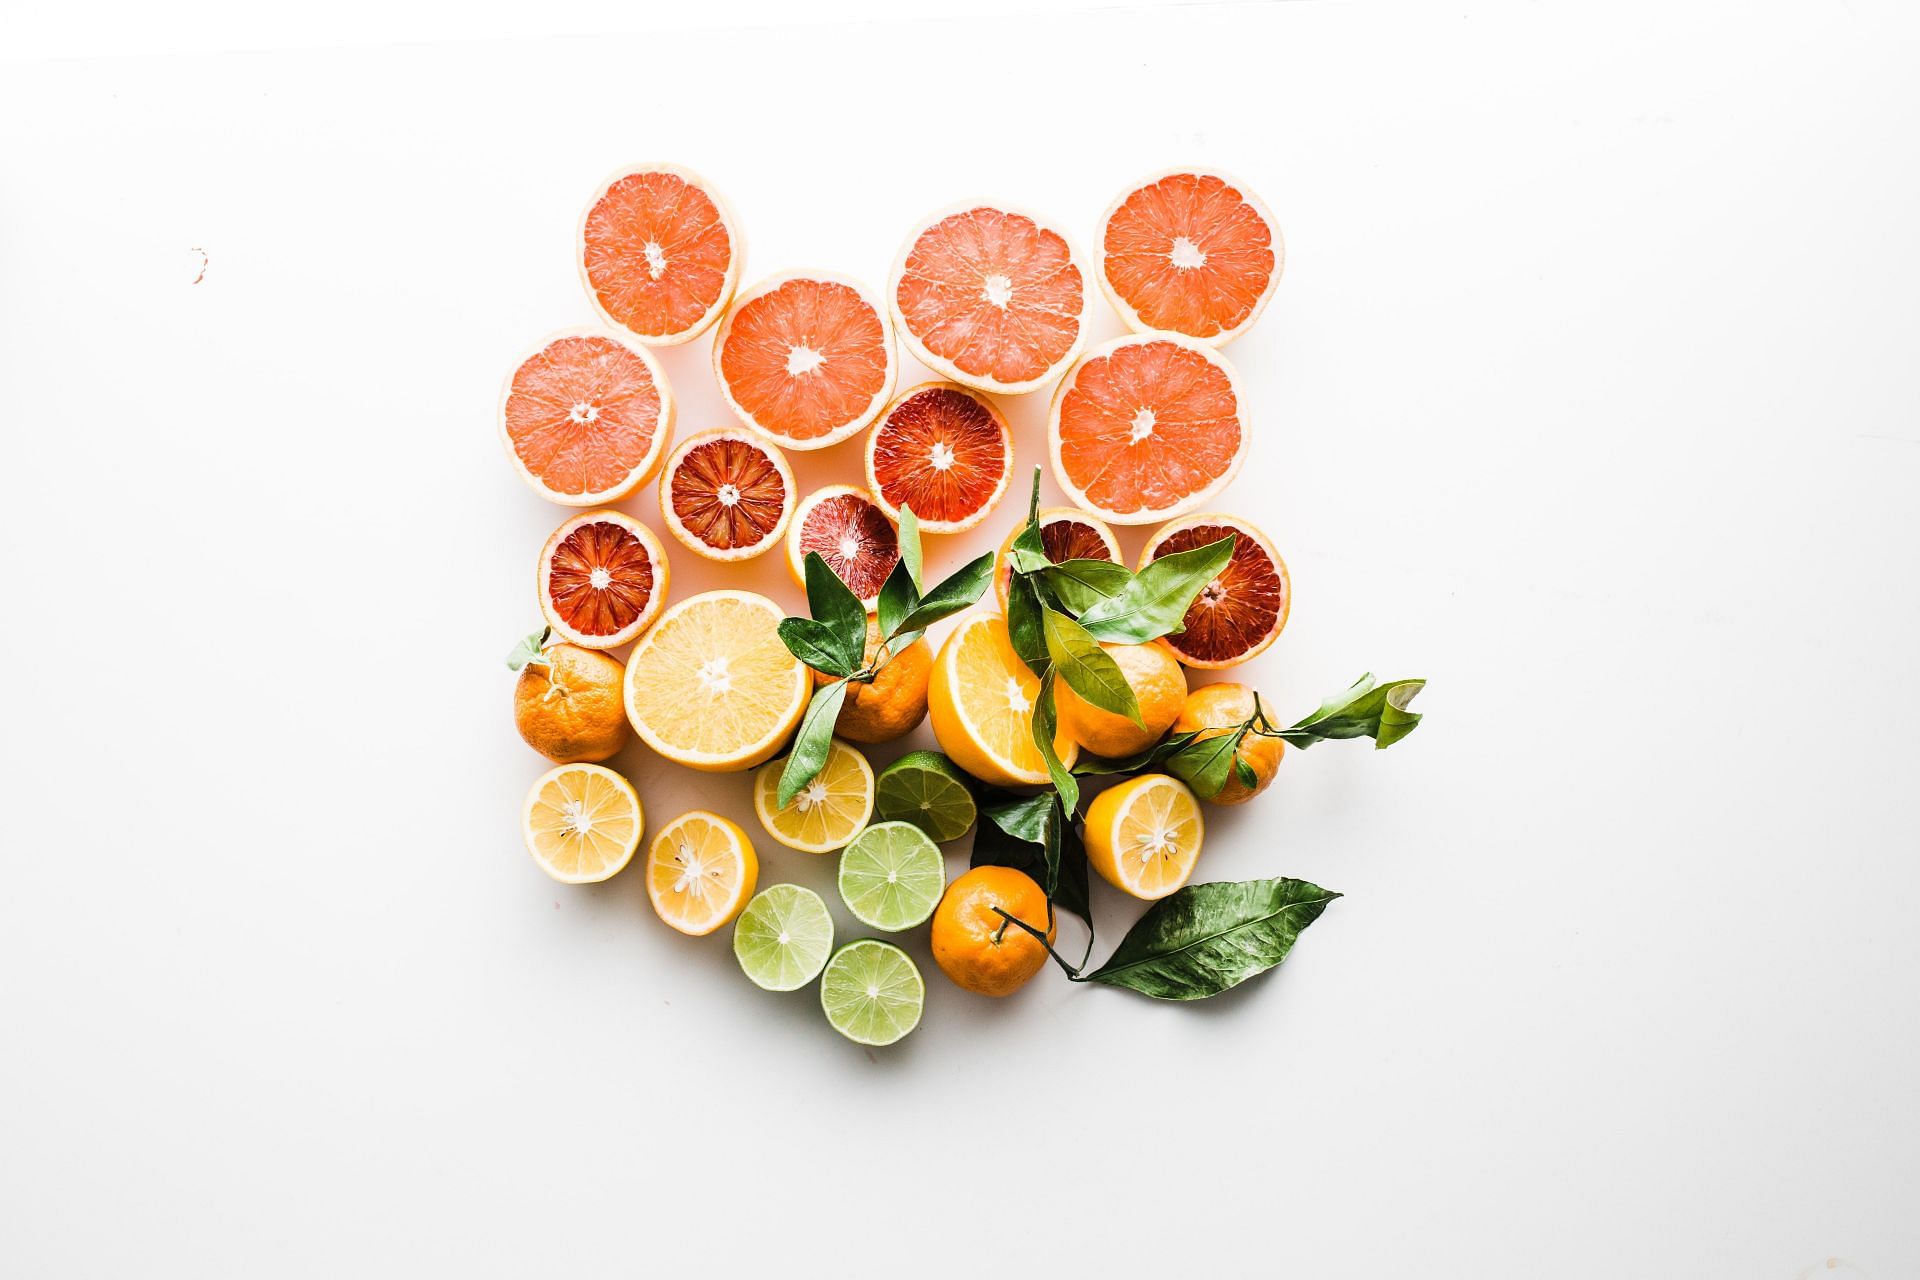 Eating more of citrus fruits can help you to remove foot odour. ( Image via Unsplash / Brooke Lark)